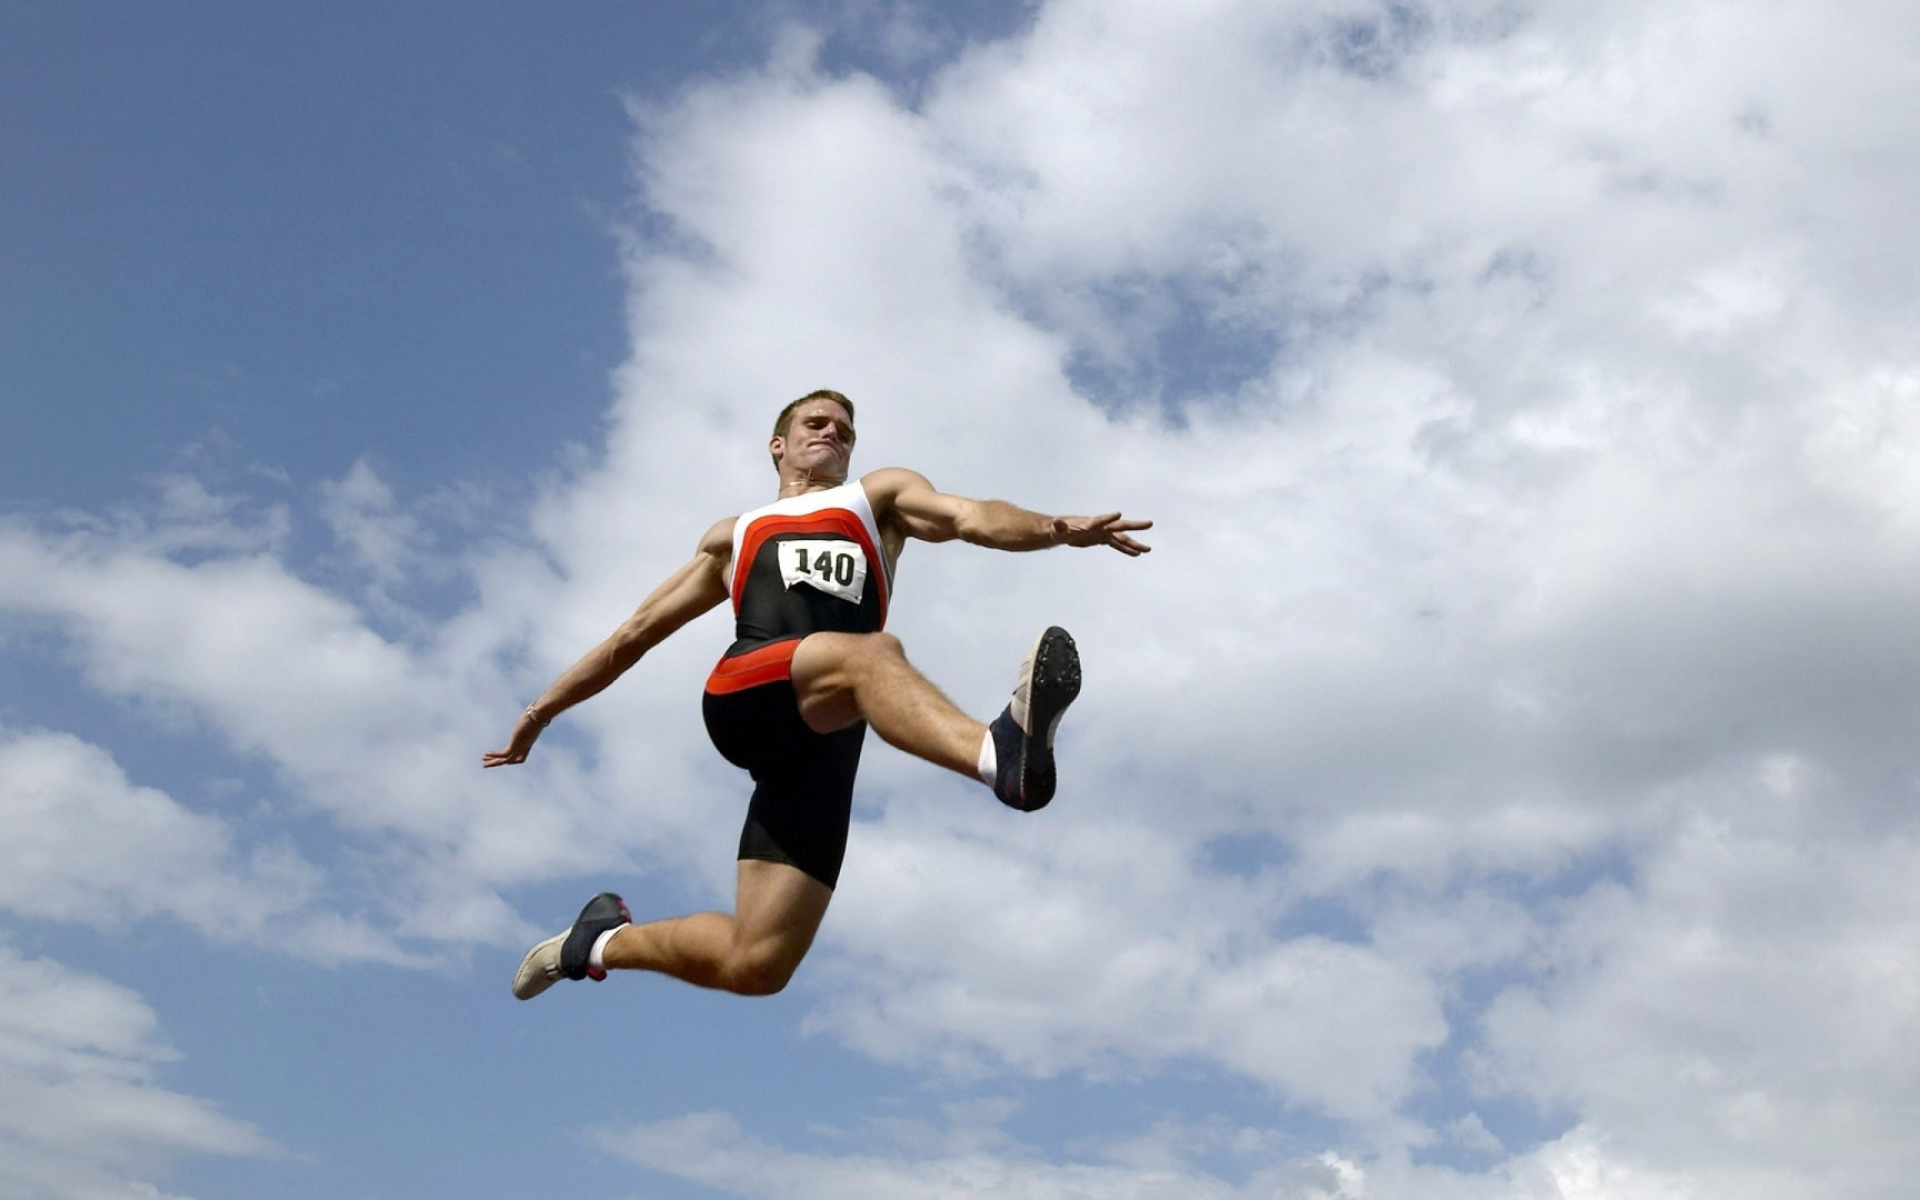 Jumping: Athlete, Long jump, Track and field, Springing into the air. 1920x1200 HD Wallpaper.